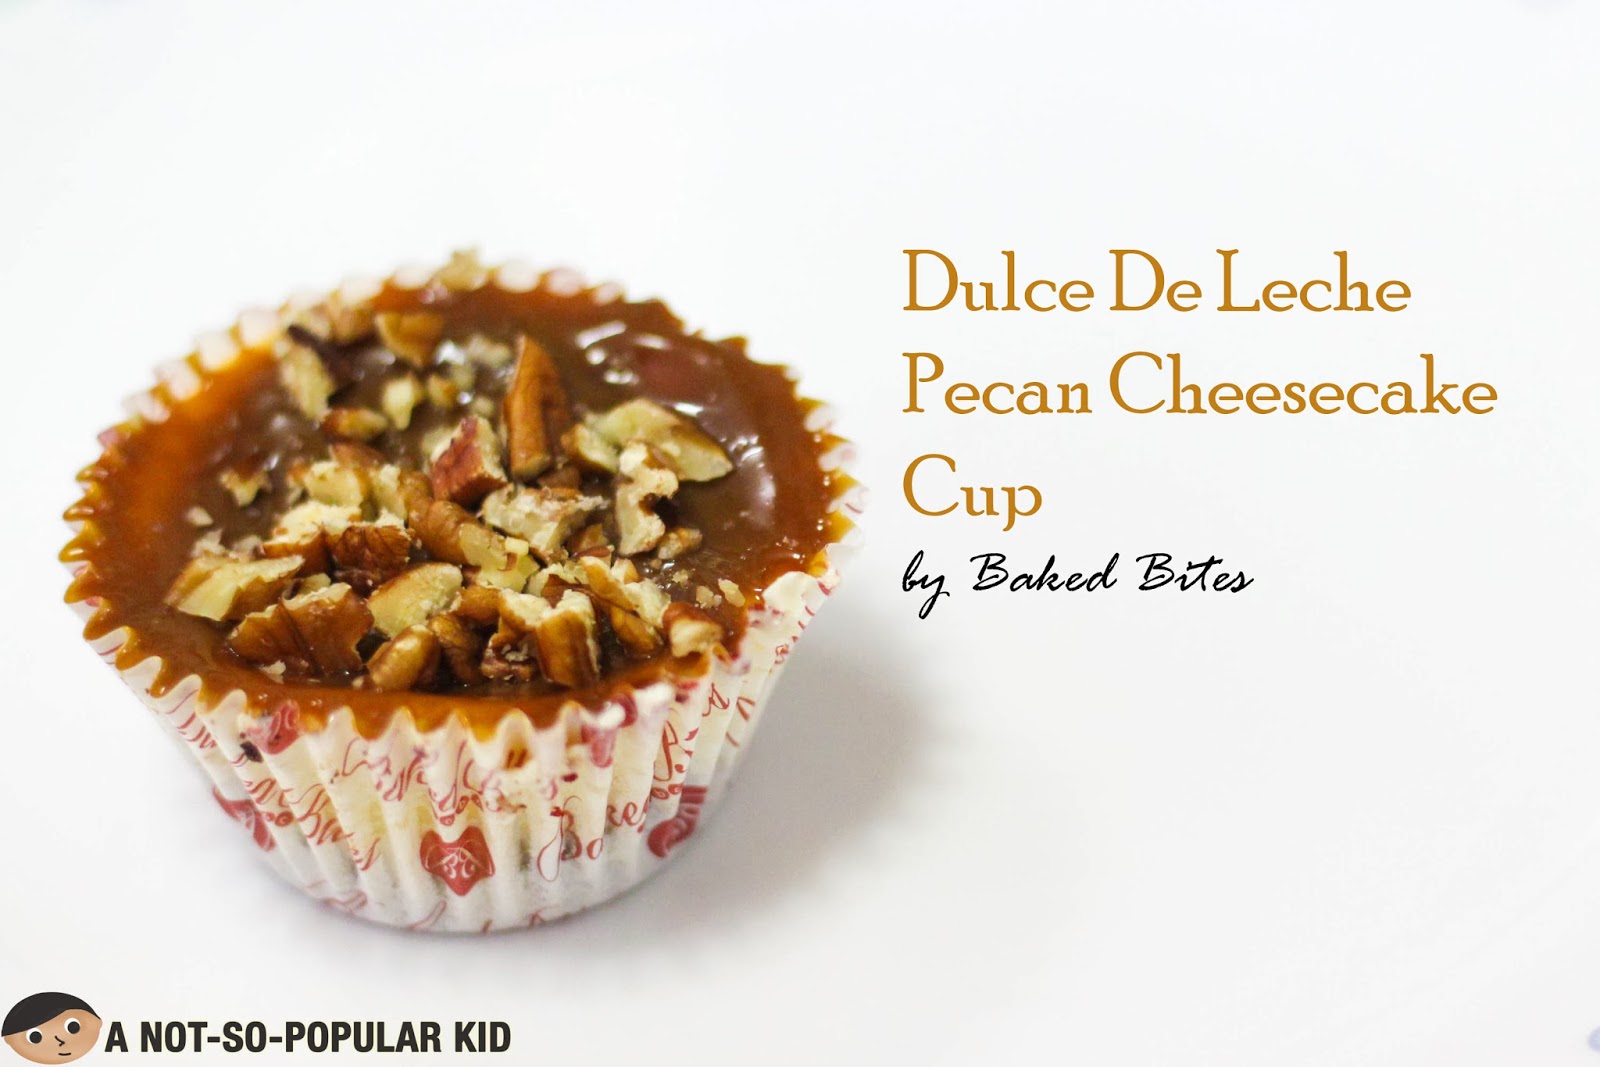 Dulce De Leche Pecan Cheesecake Cup by Baked Bites